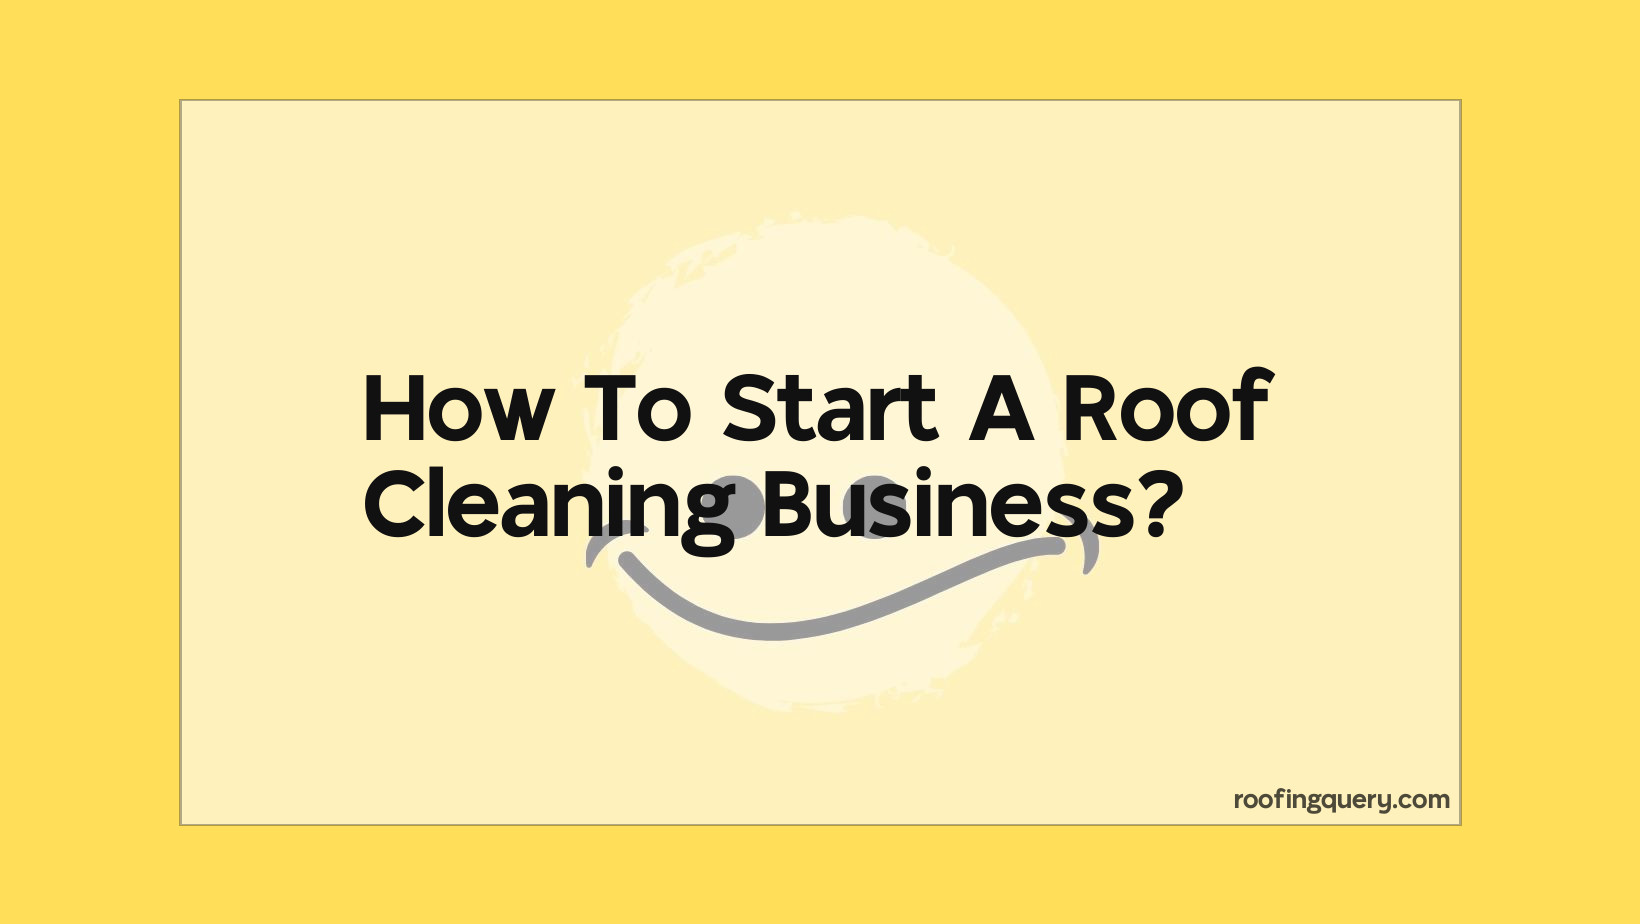 How To Start A Roof Cleaning Business?